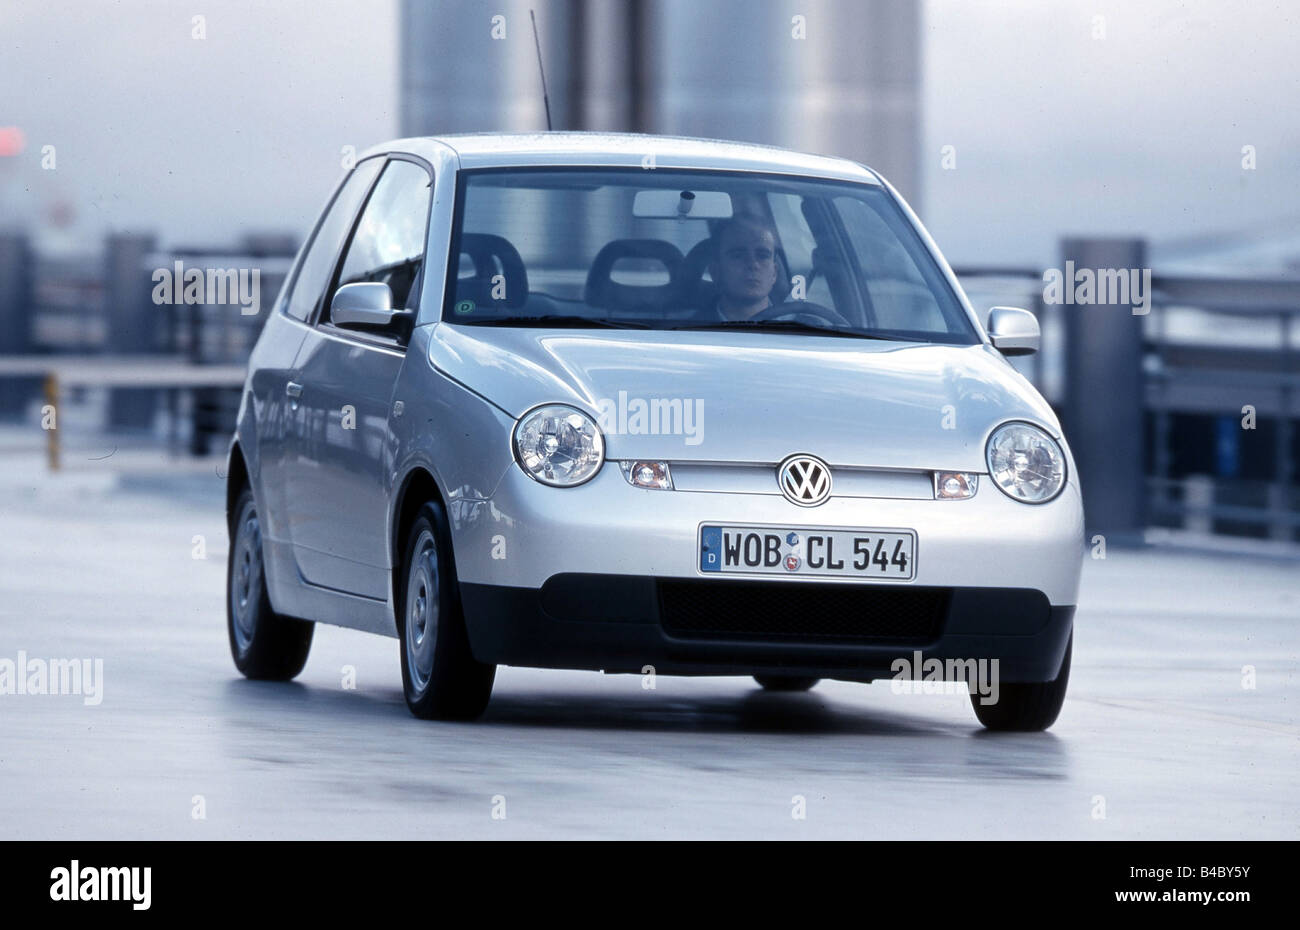 Car, VW Volkswagen Lupo, 3-liter approx., model year 2004, silver, Minicars, driving, diagonal from the front, frontal view, pho Stock Photo